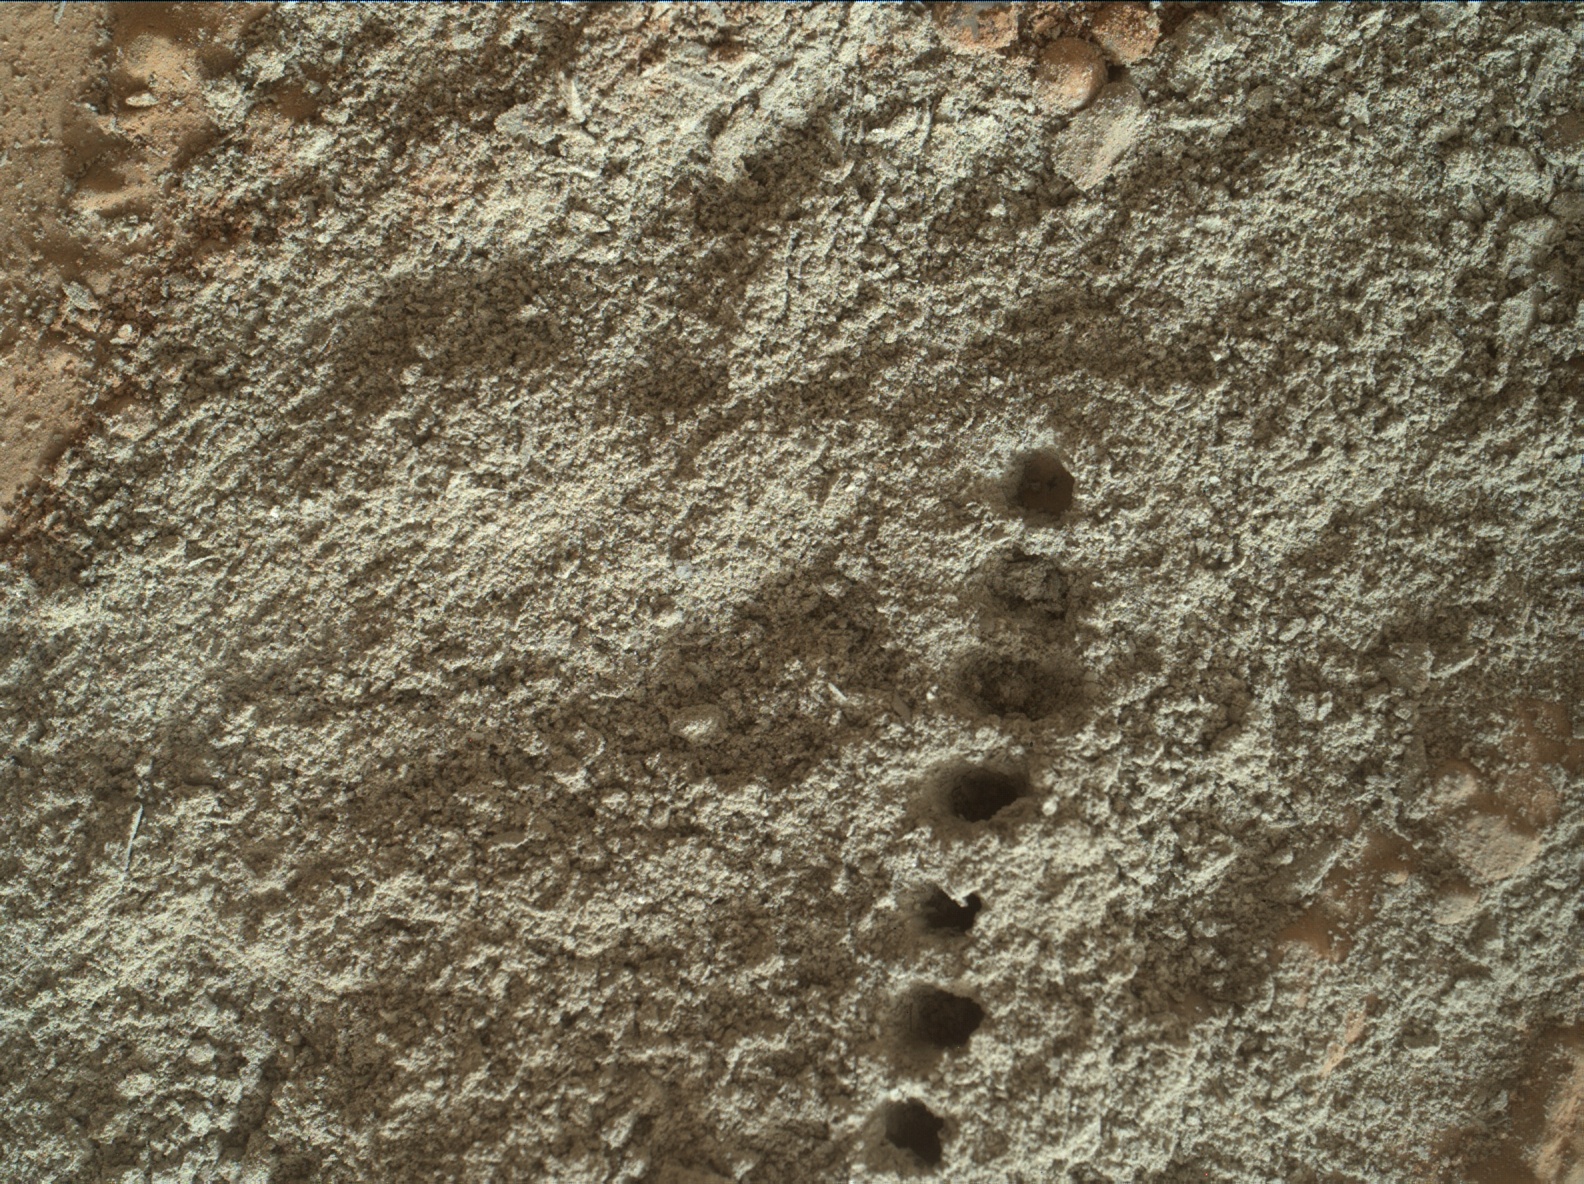 Nasa's Mars rover Curiosity acquired this image using its Mars Hand Lens Imager (MAHLI) on Sol 283